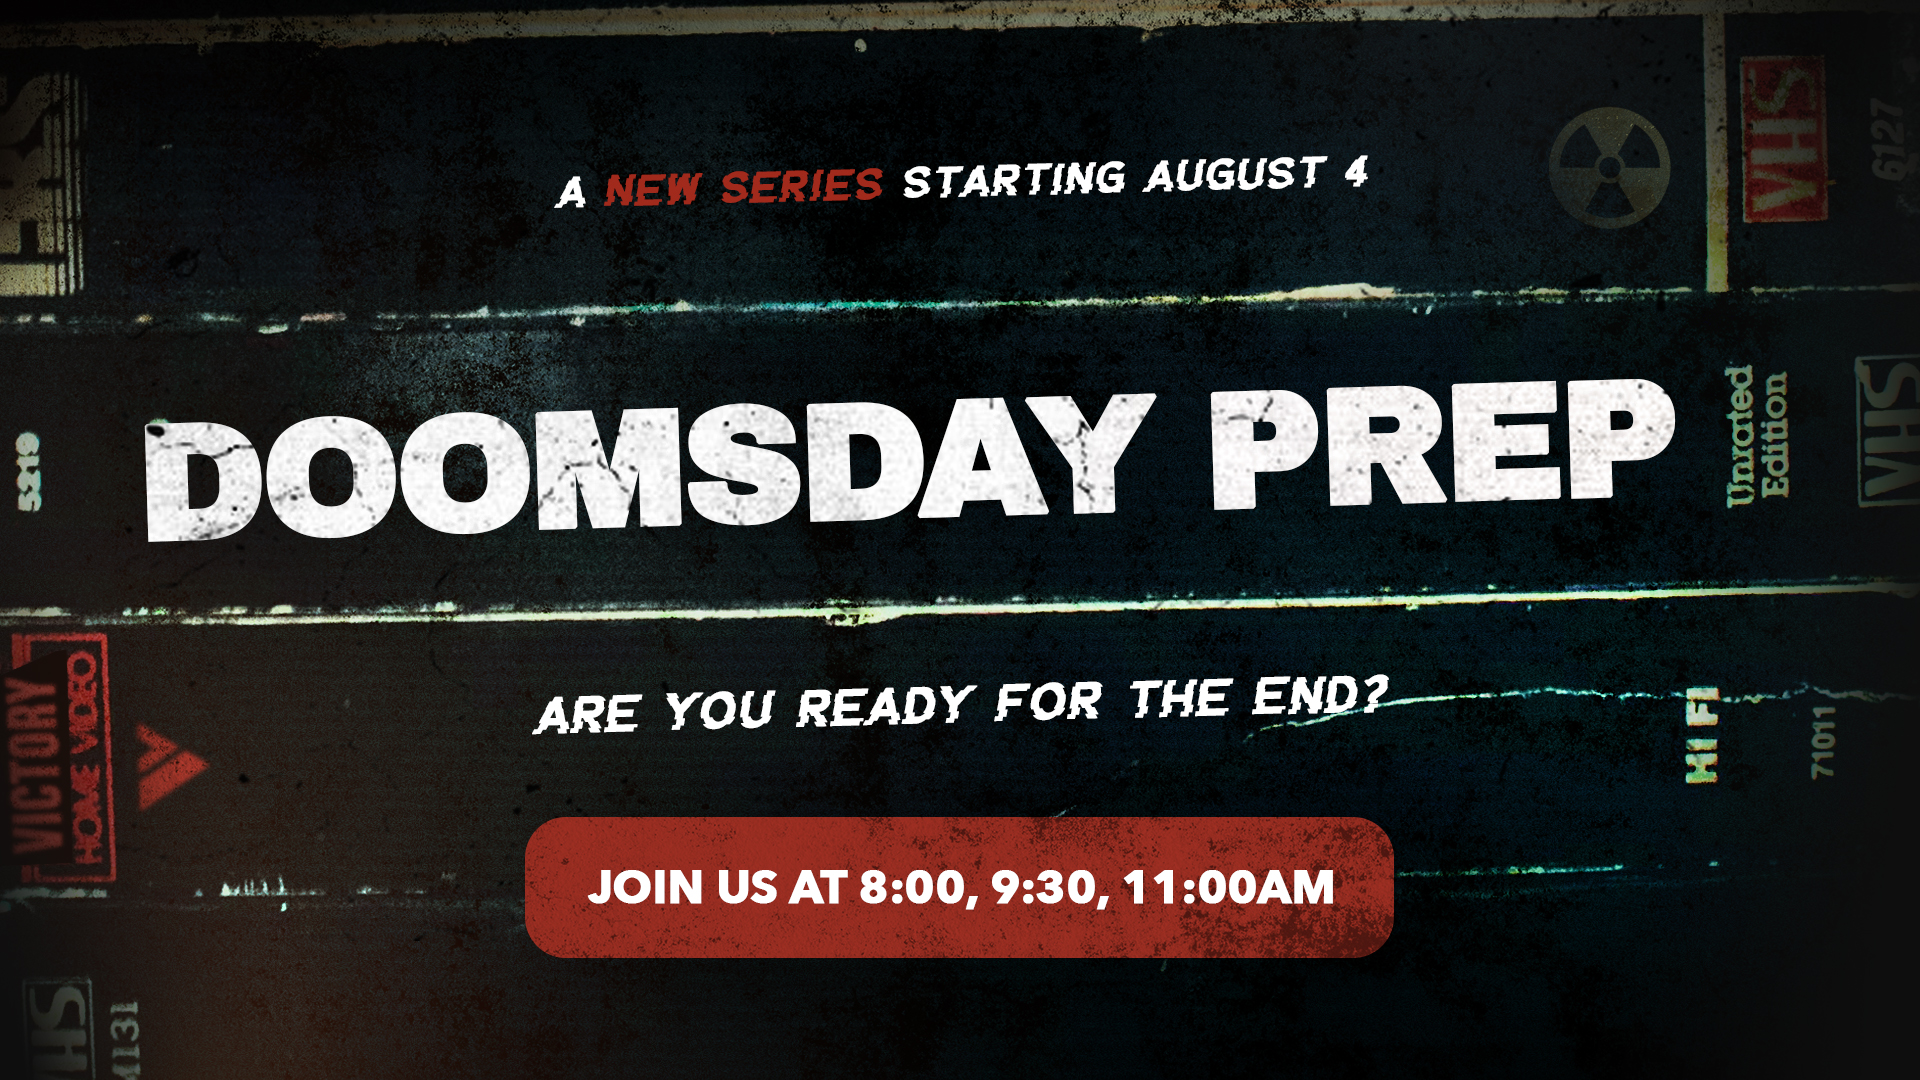 Our Fall Kickoff Series, Doomsday Prep, is coming August 4-25!